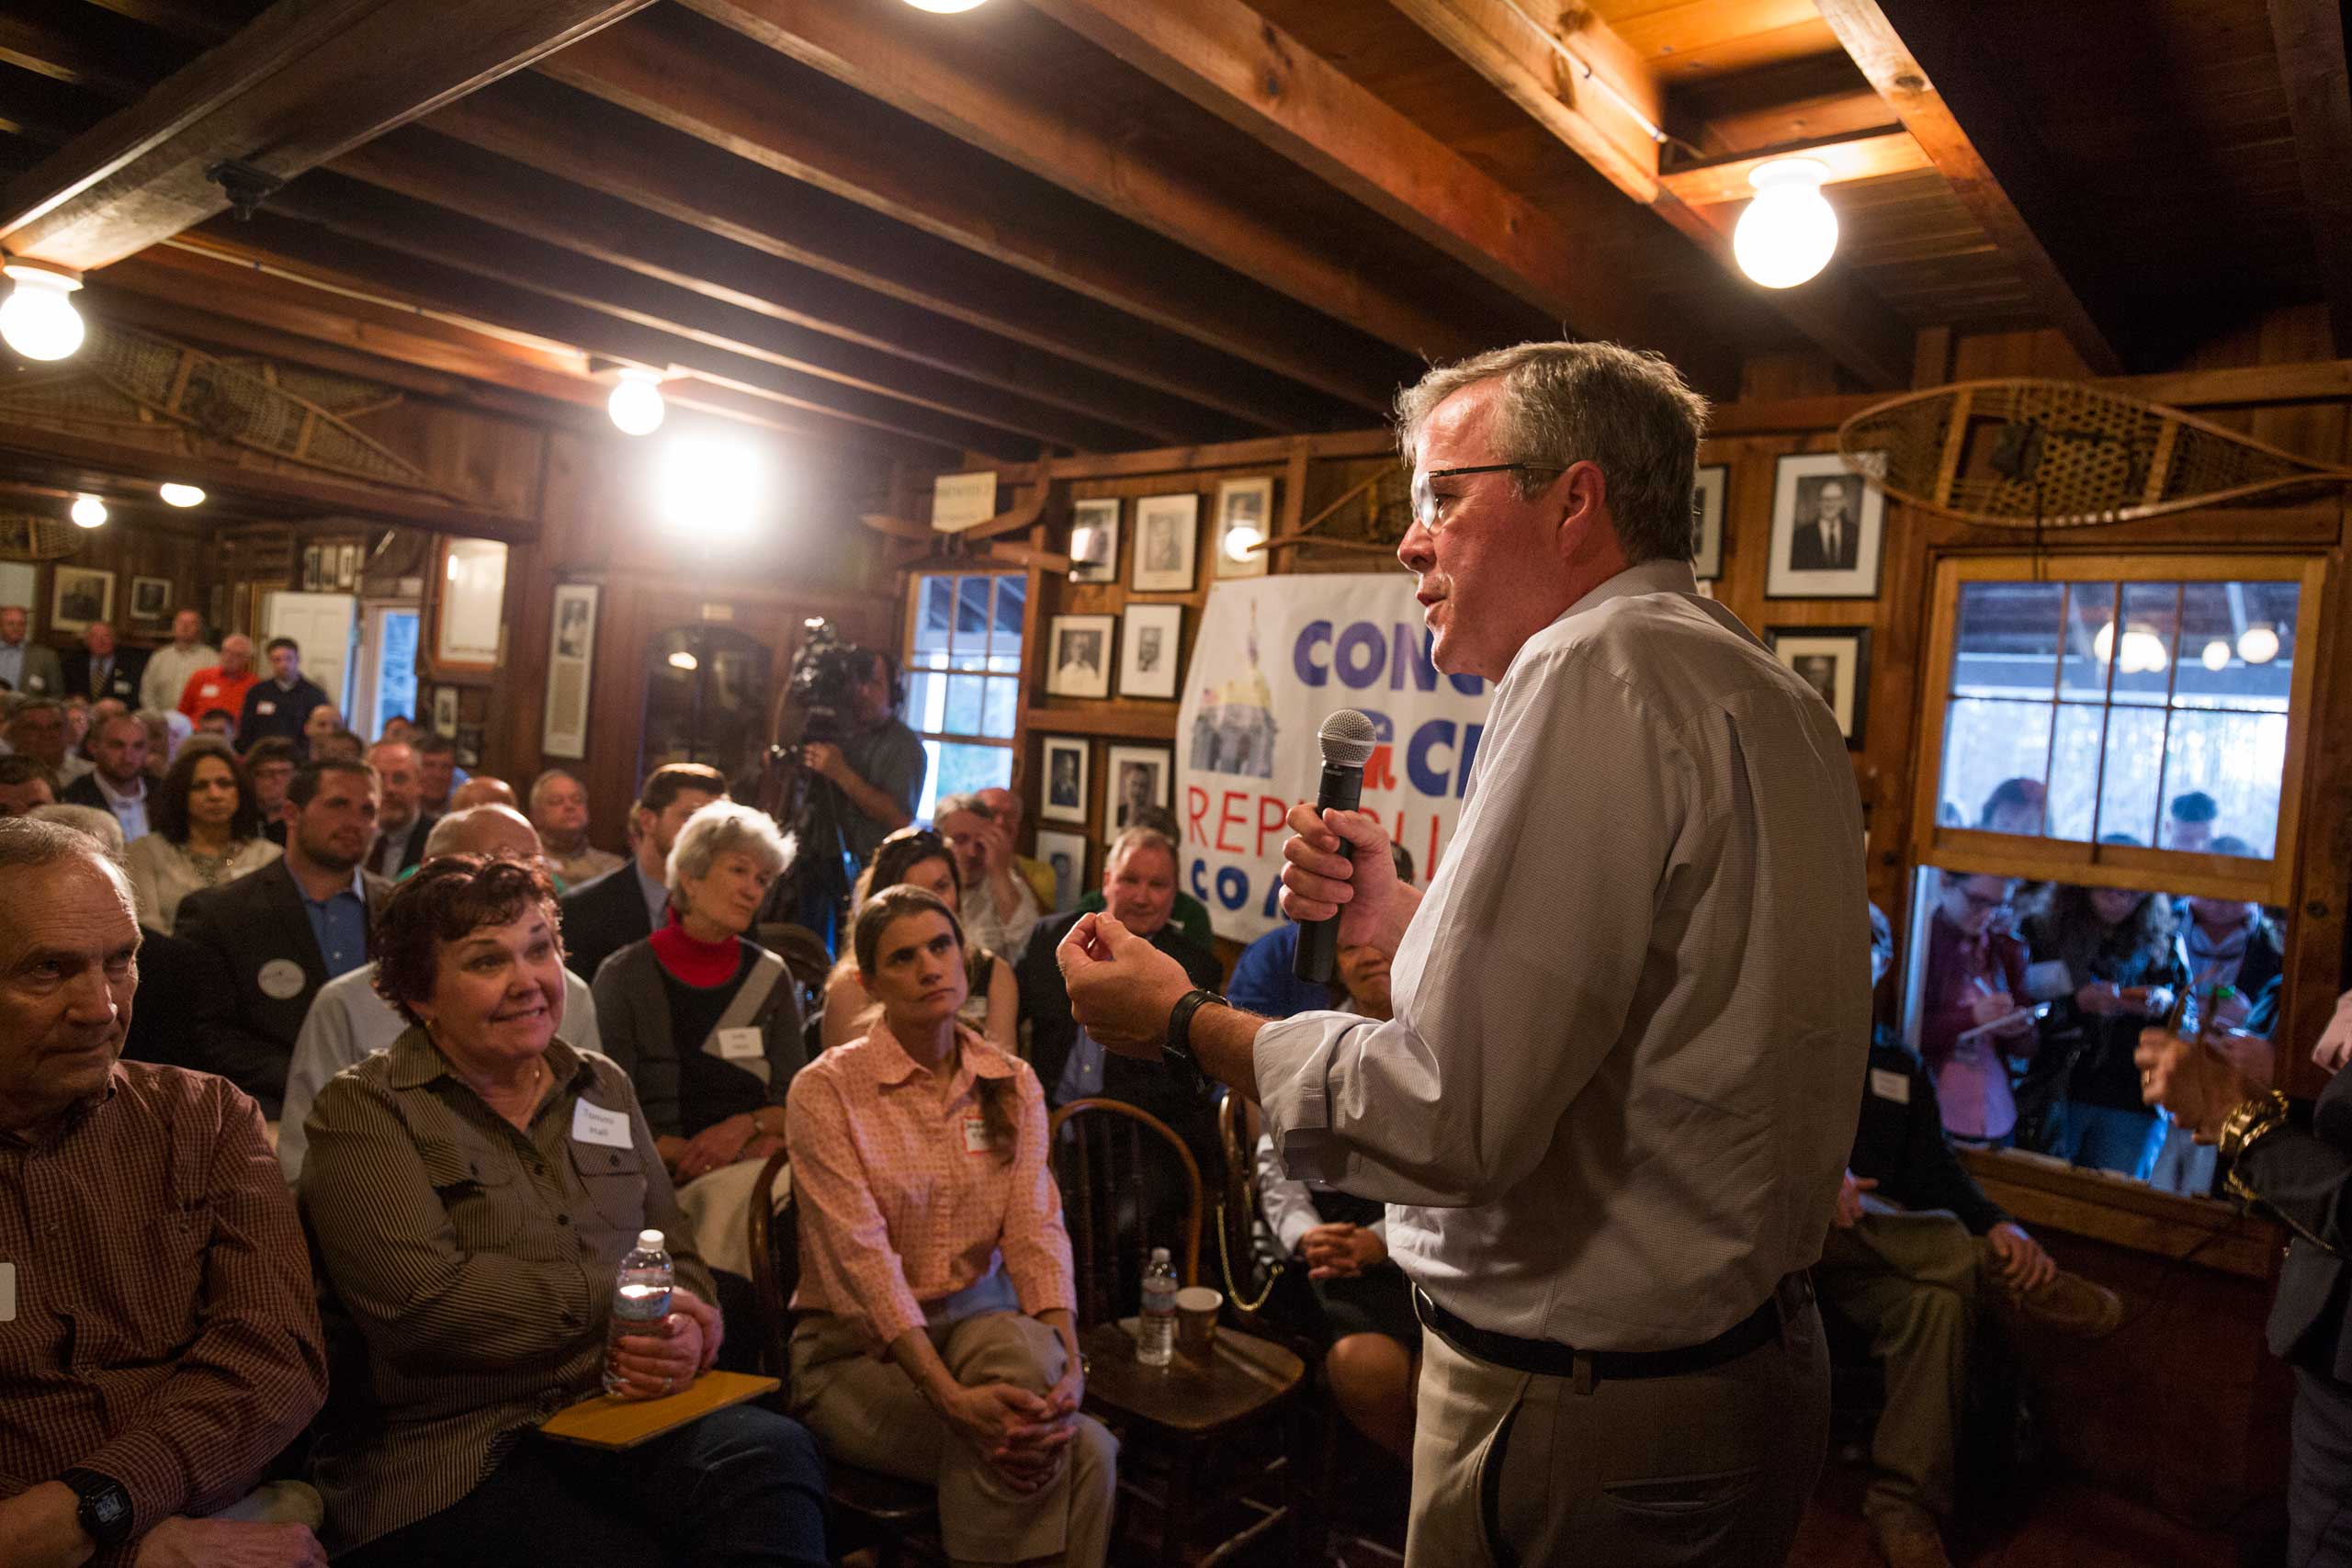 Jeb Bush speaks at the Concord City Republican Committee’s “Politics and Pies” series  at the Concord Snowshoe Club in Concord, N.H. on April 16, 2015. (Brooks Kraft—Corbis for TIME)